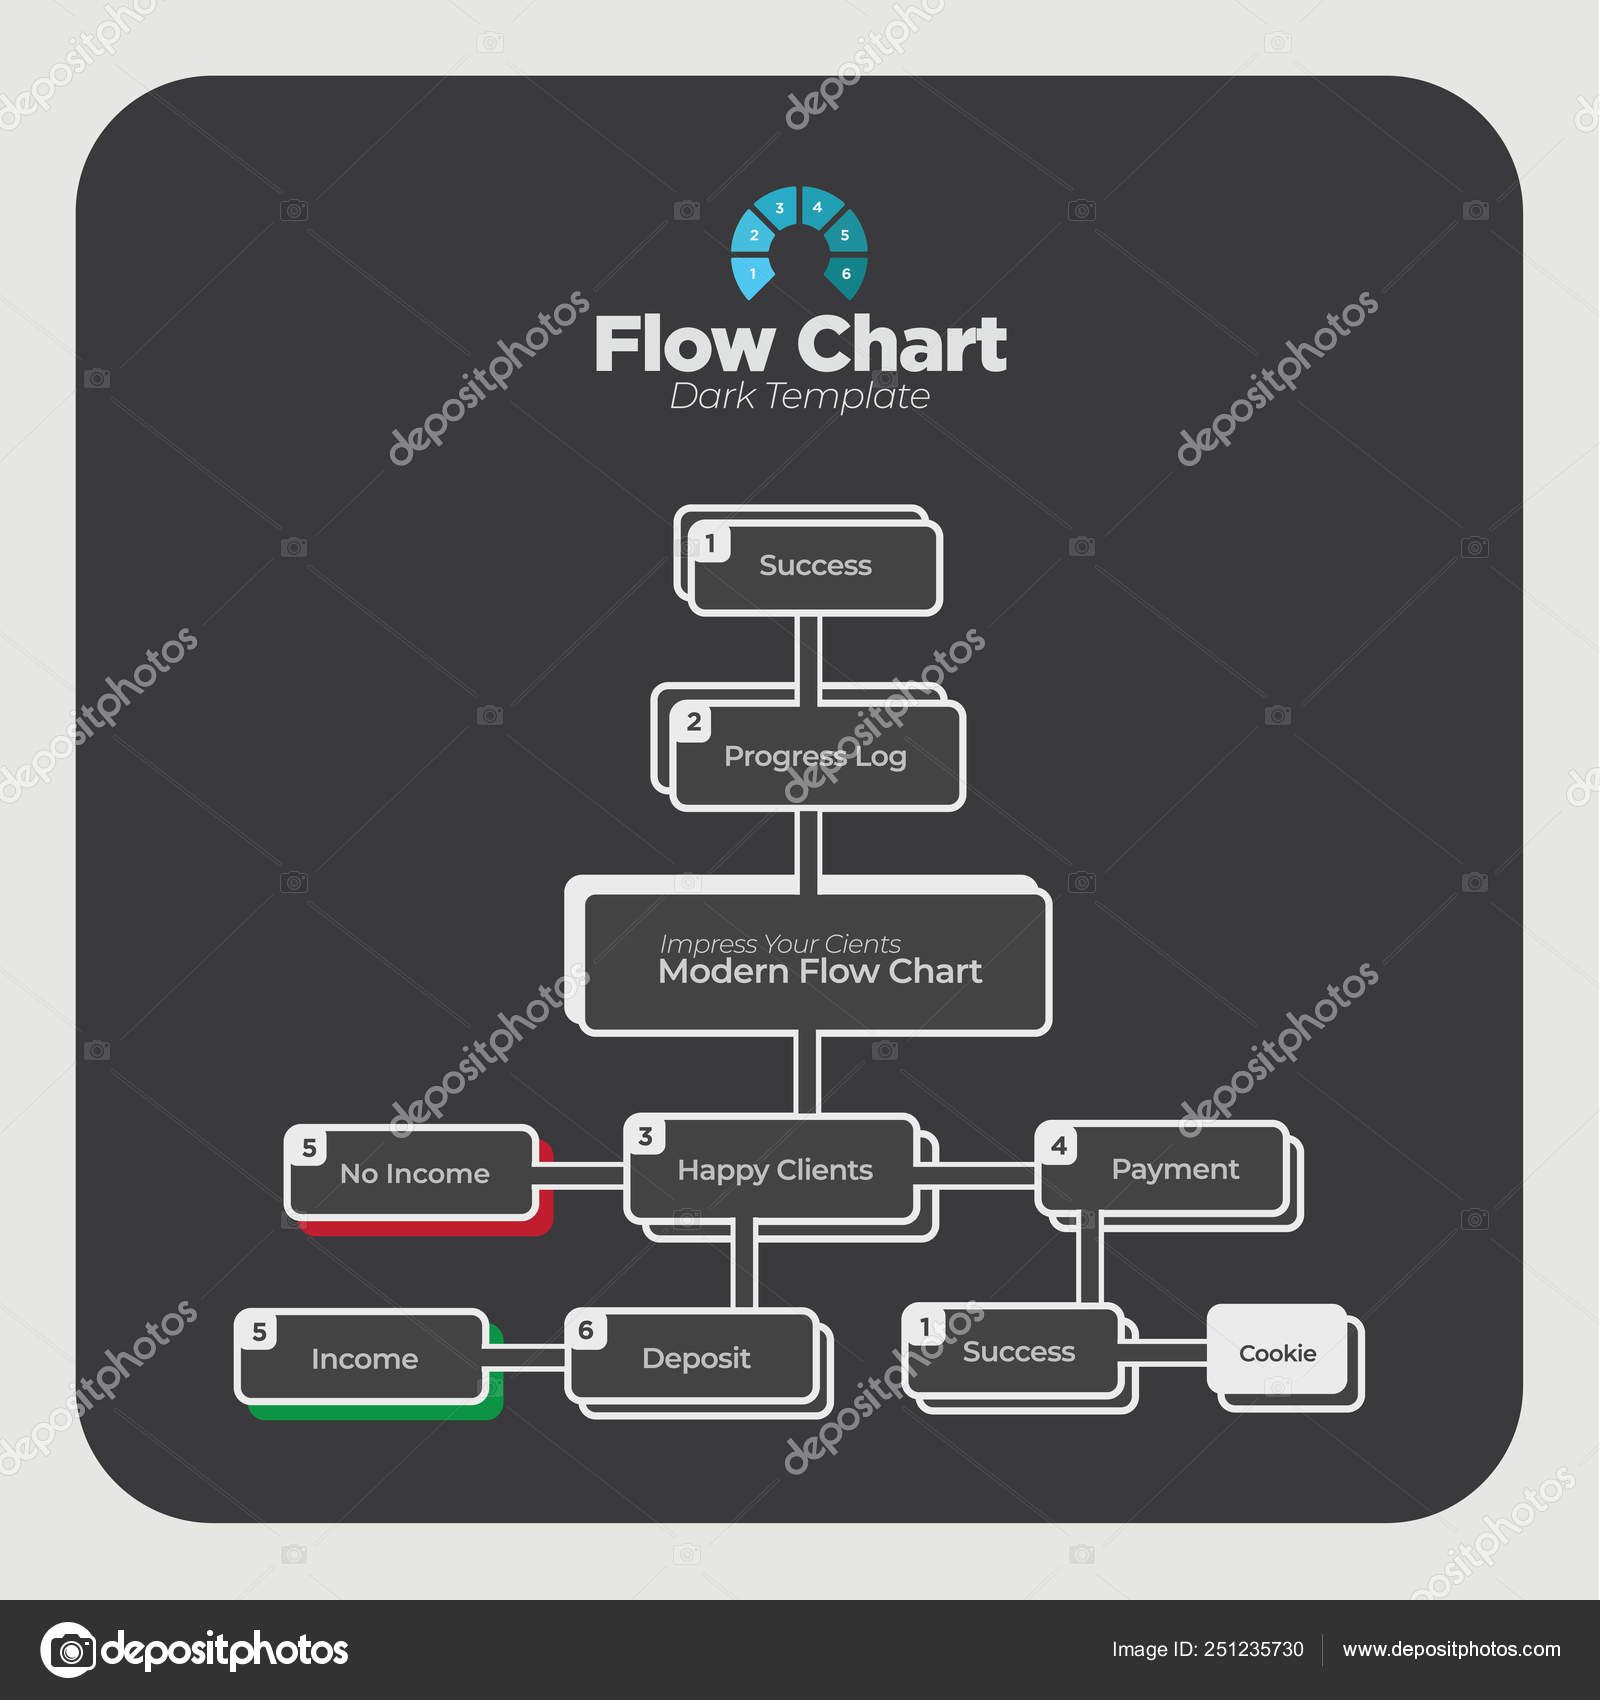 Build Your Own Flow Chart